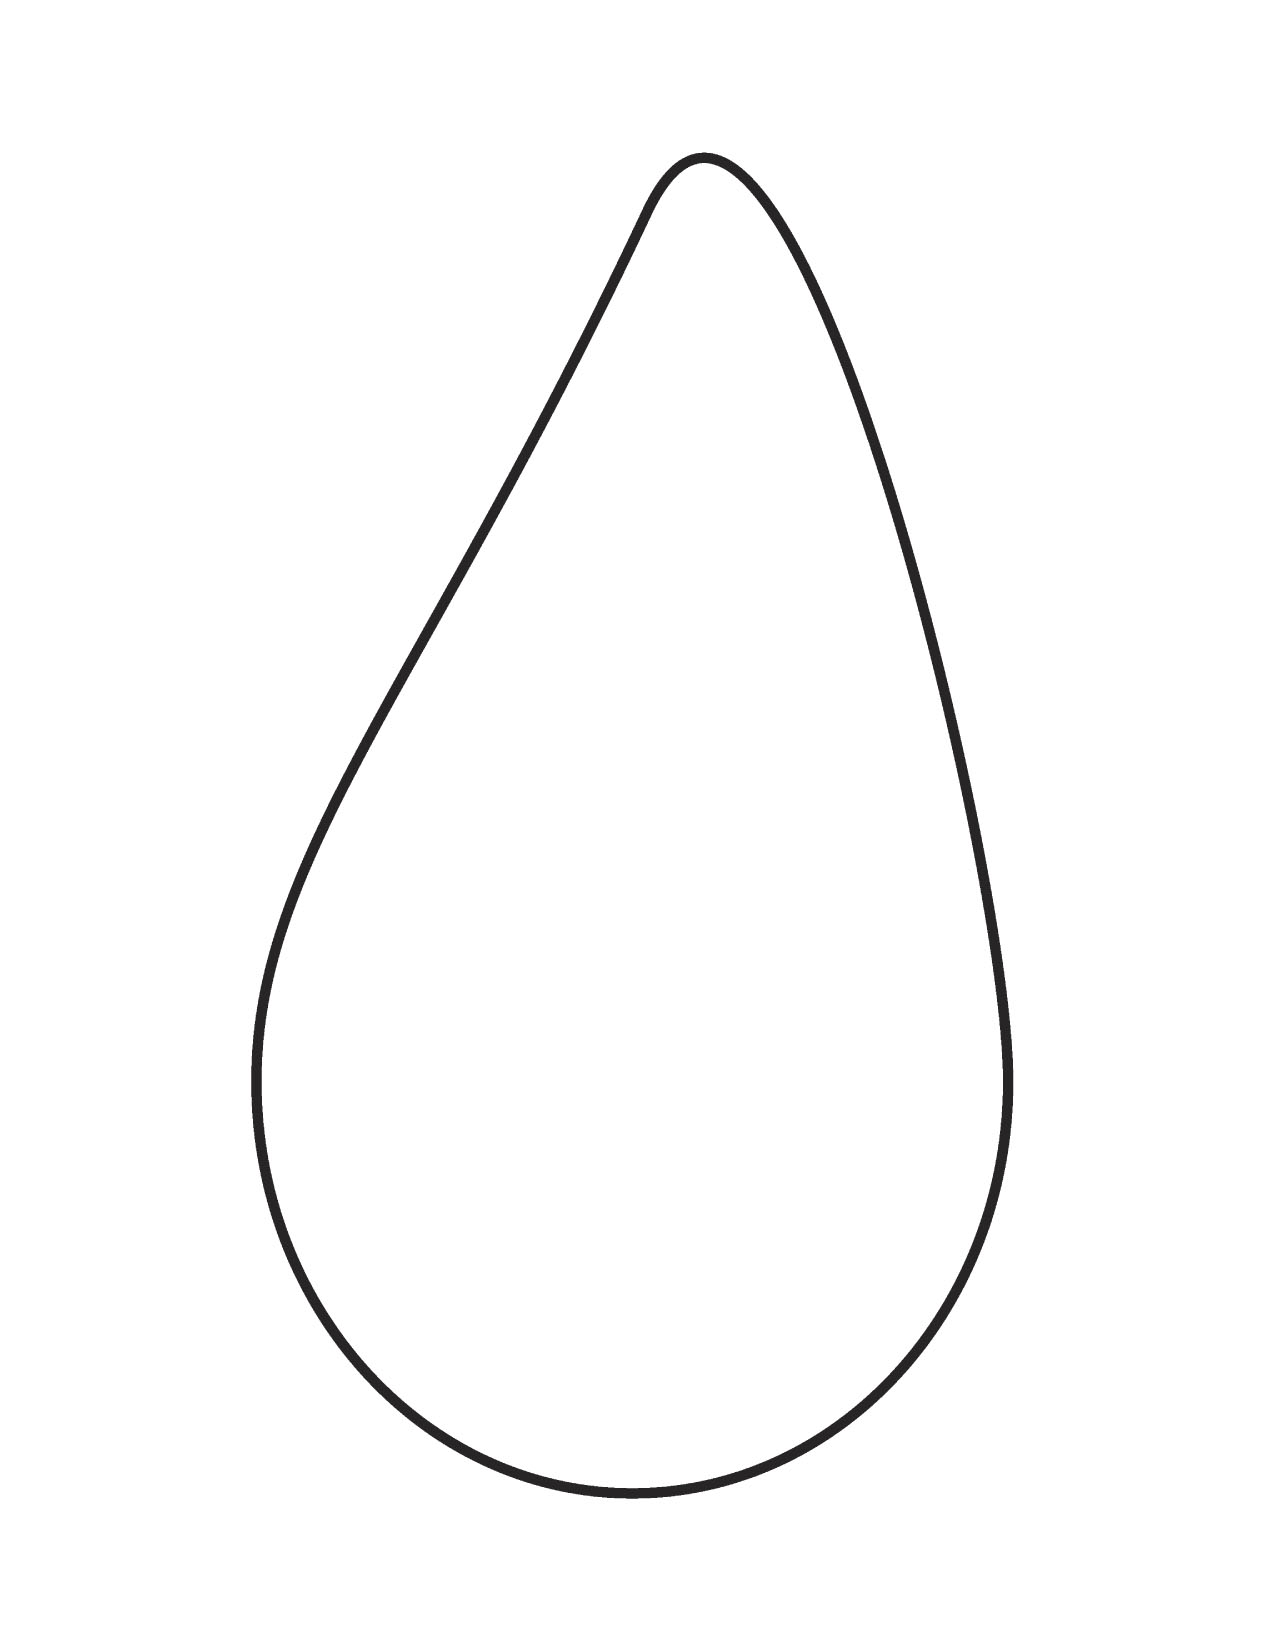 Raindrop Template Printable Cliparts.co